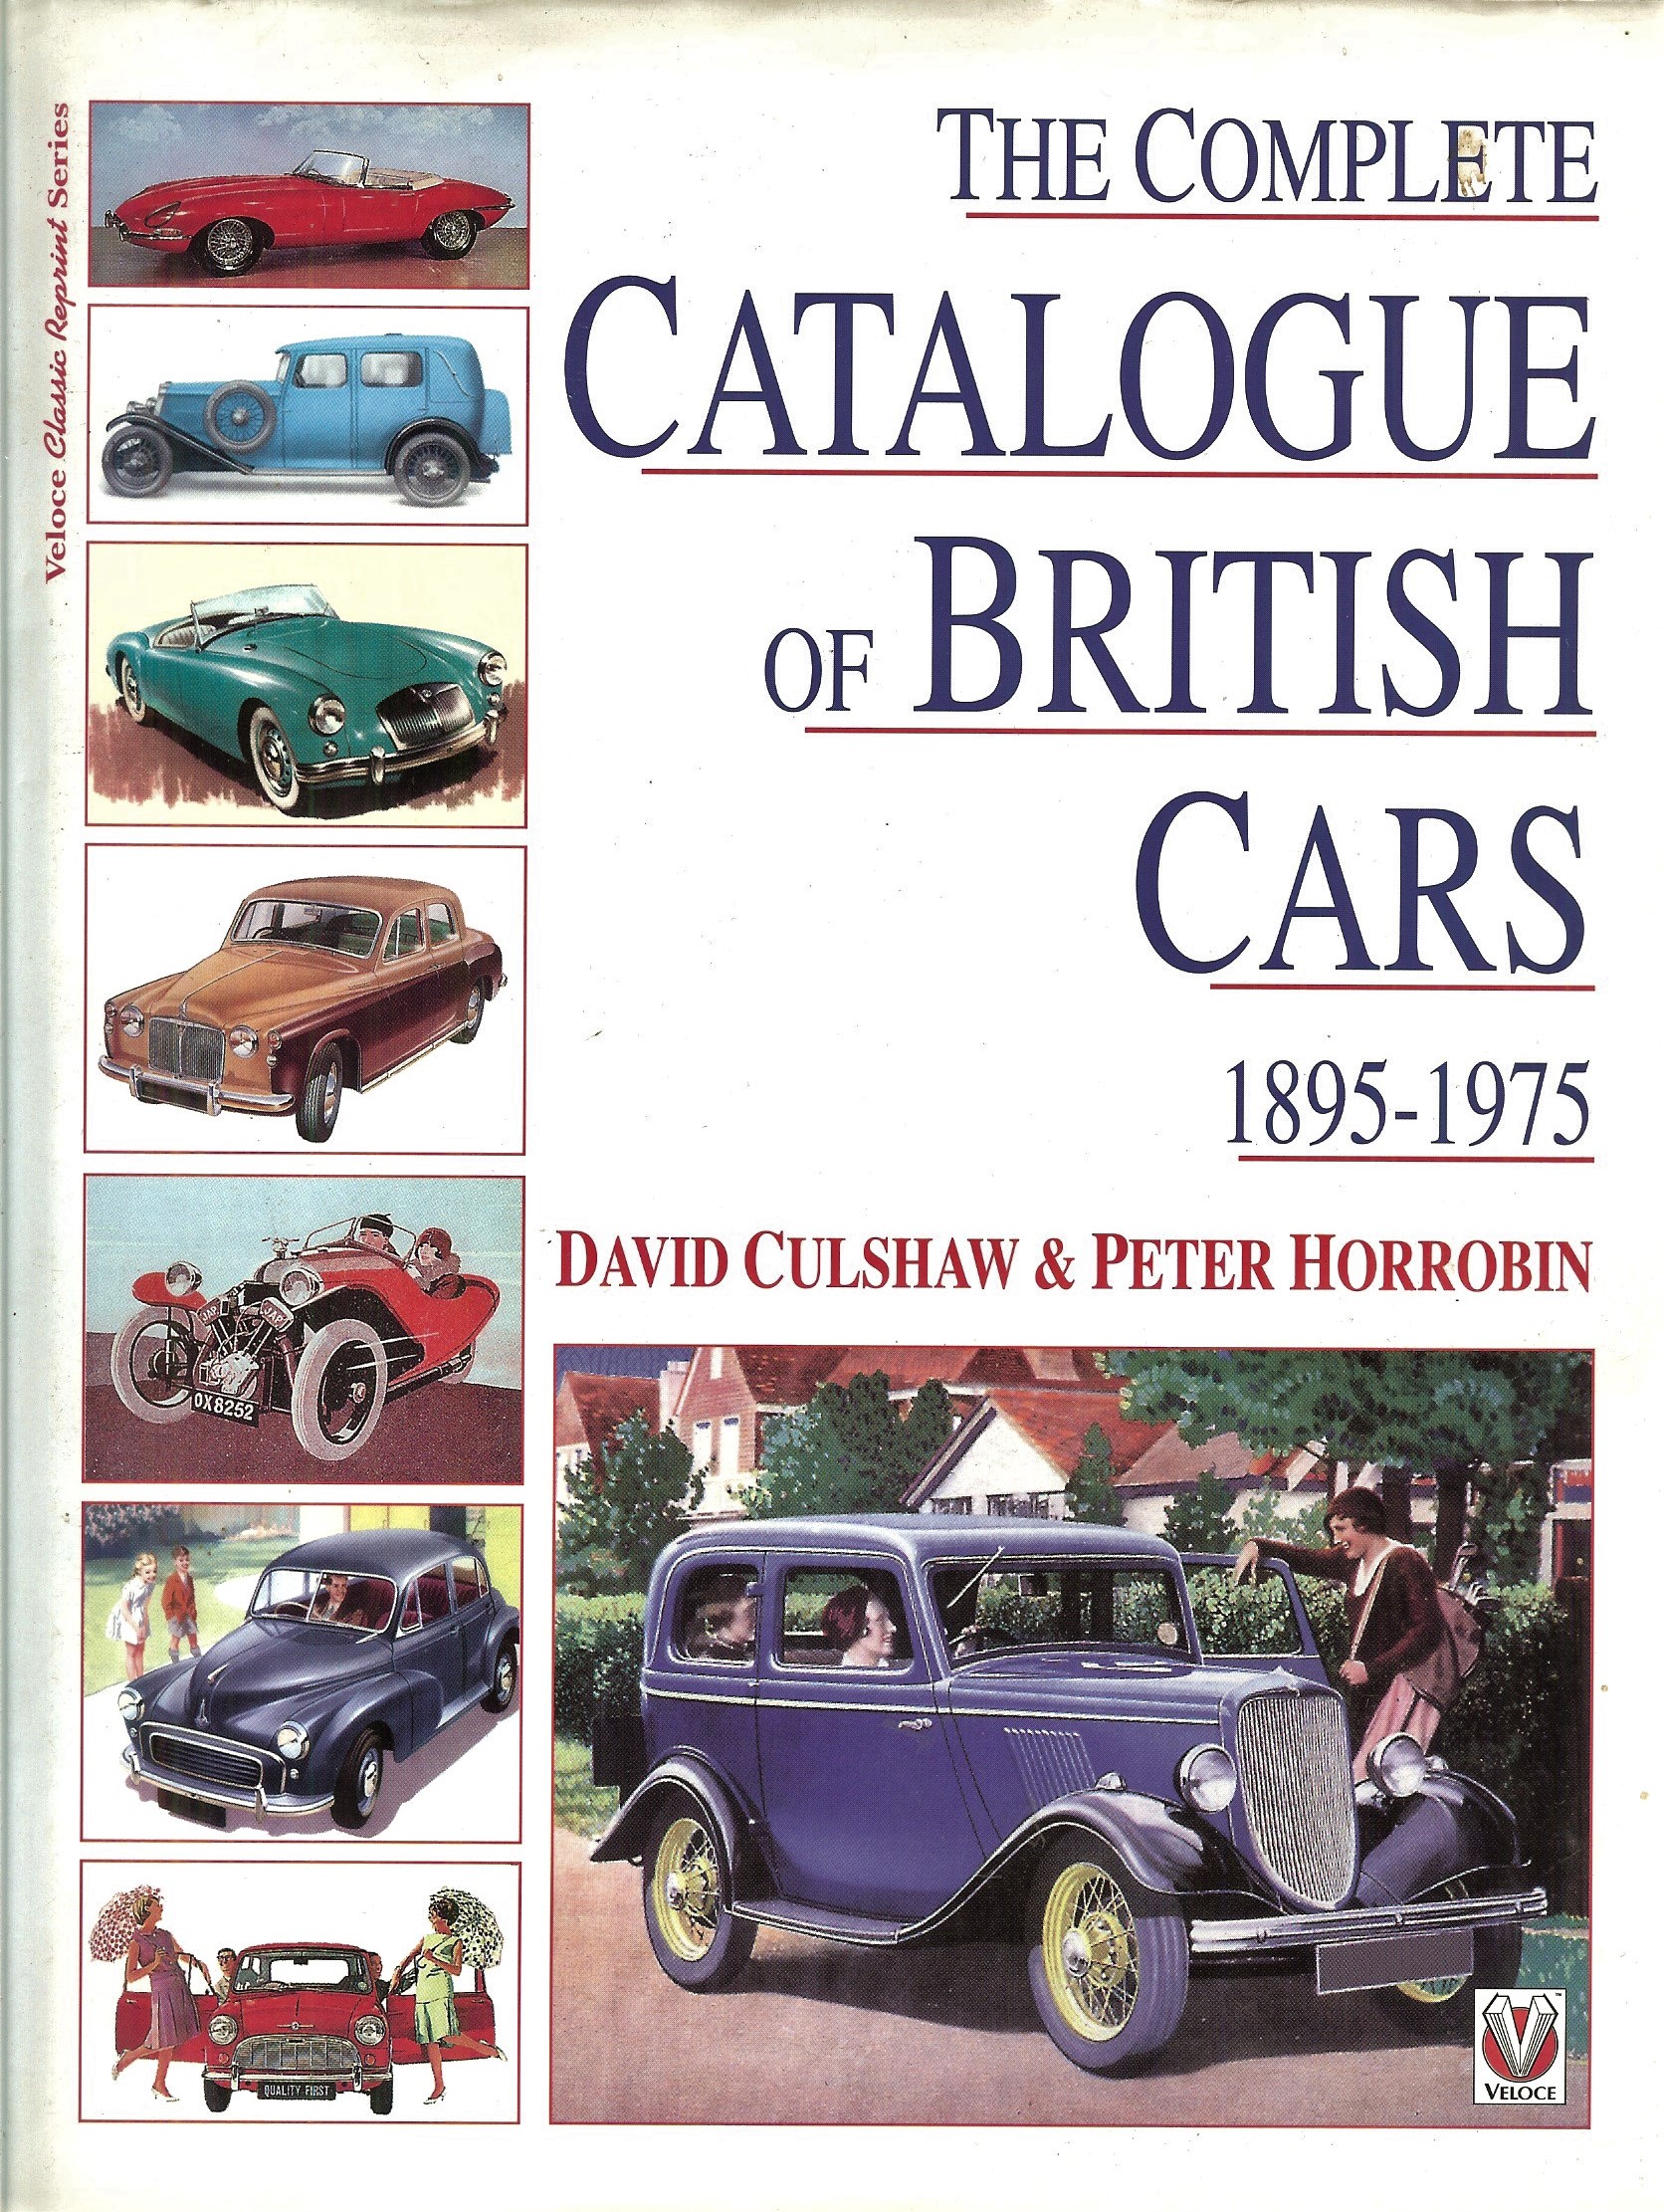 TRANSPORTATION - THE COMPLETE CATALOGUE OF BRITISH CARS